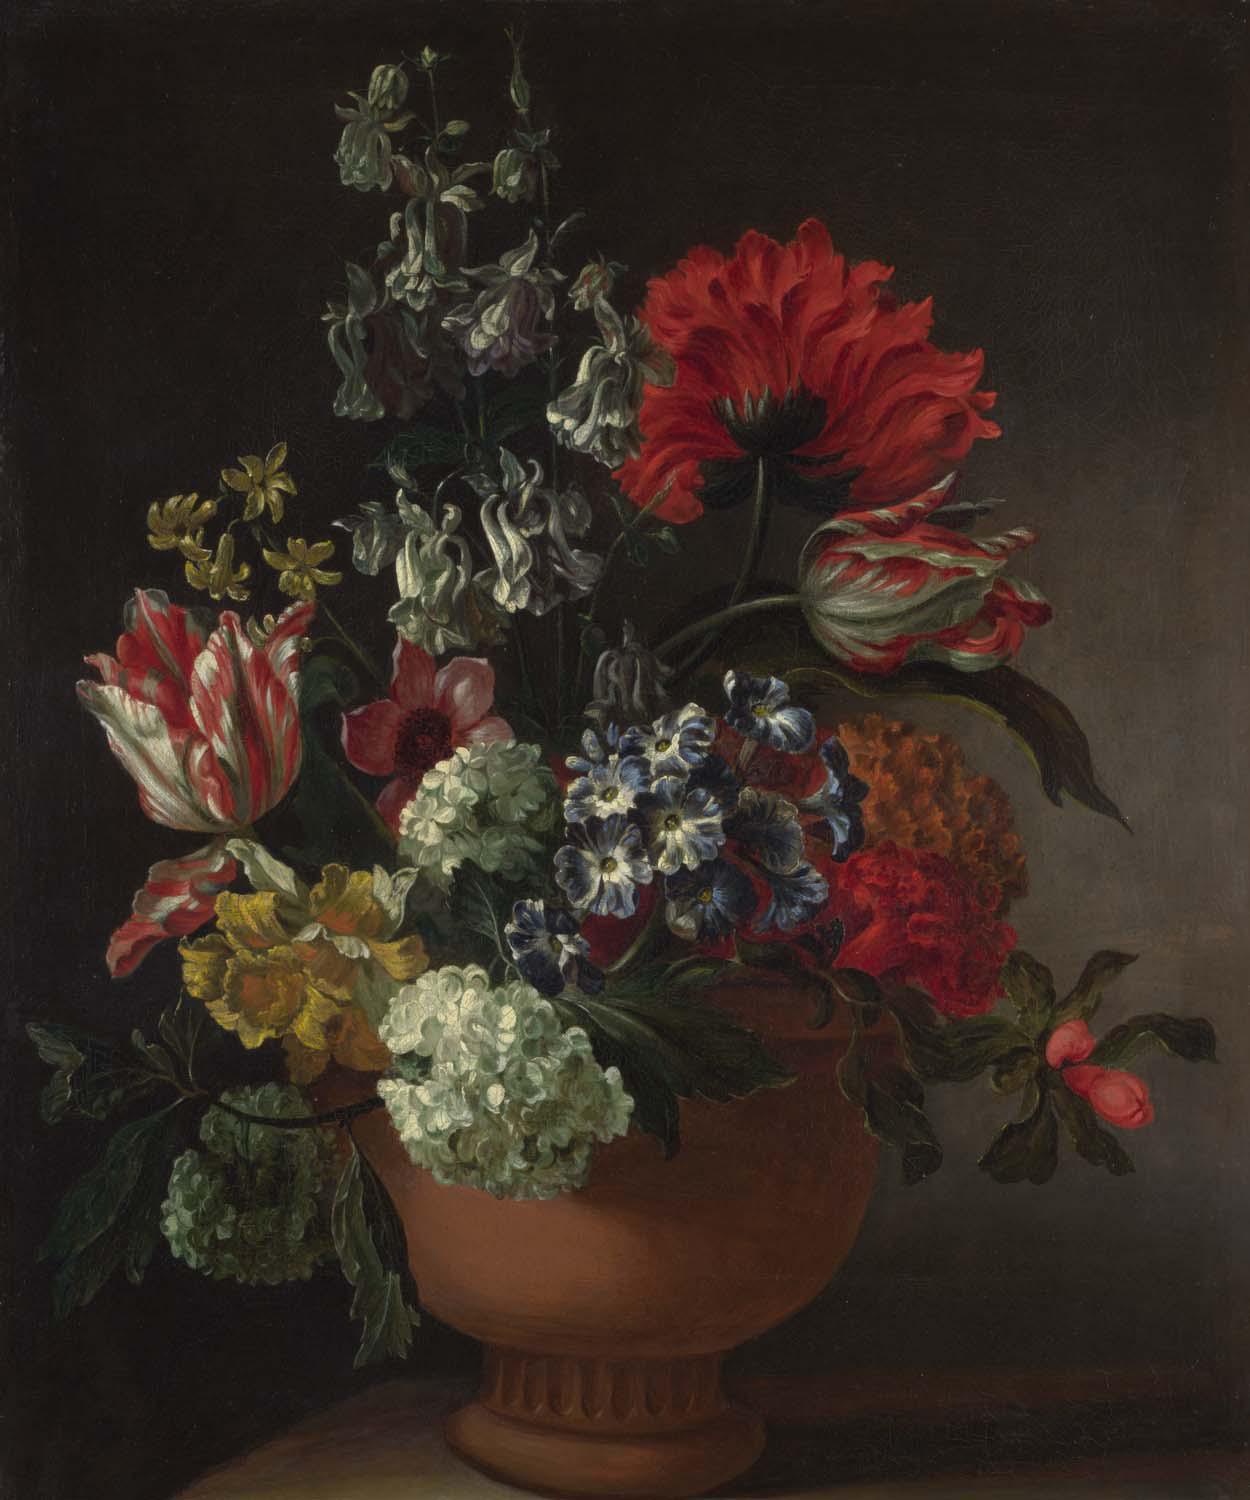 Bowl Of Flowers - Marie Blancour - National Gallery Art Cloth